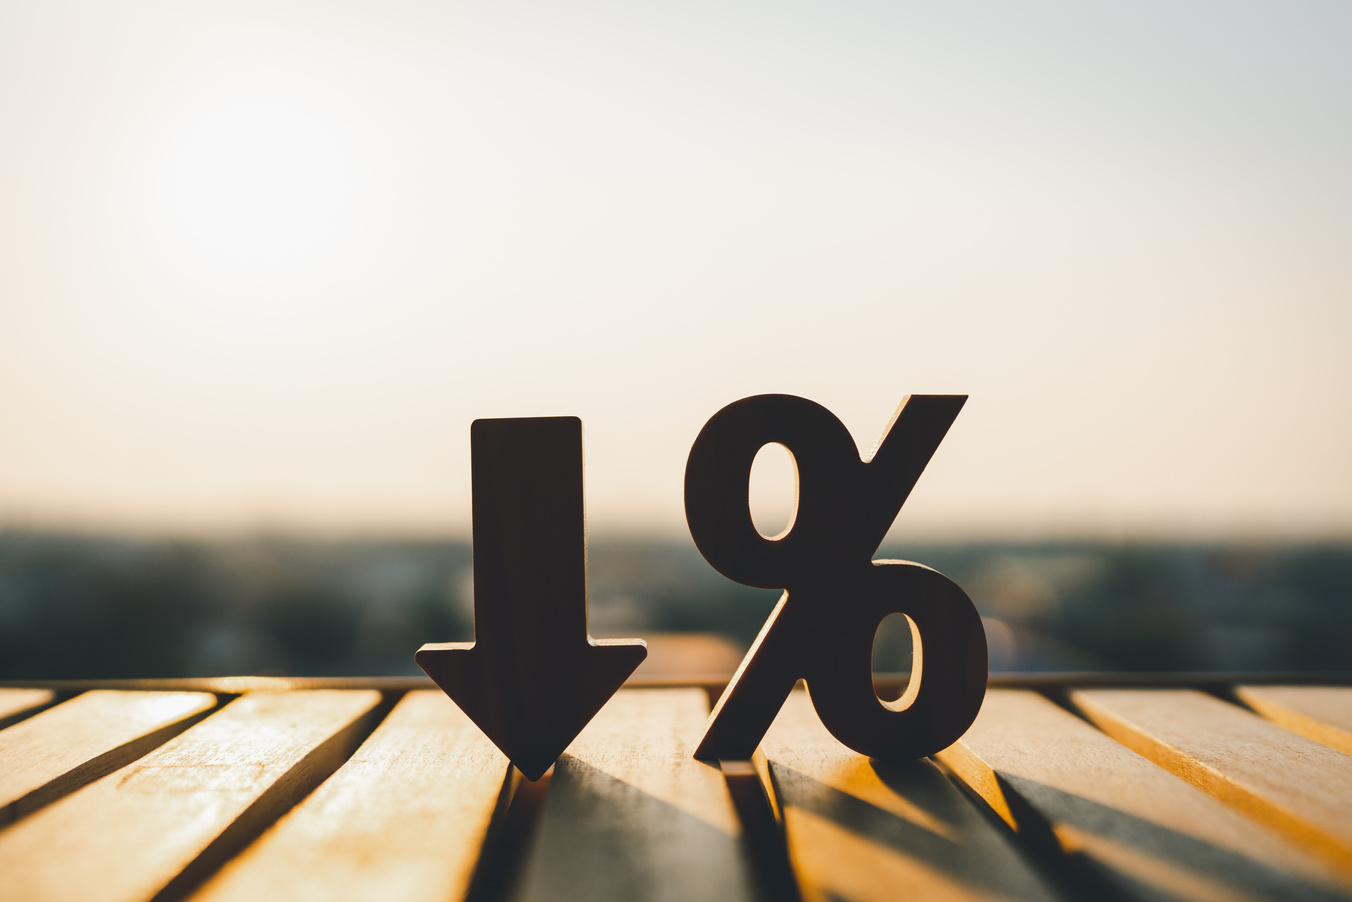 Percentage model and down arrow with evening sky Key concepts for success, methods, systems of raising or lowering Fed interest rates to correct inflation concepts.